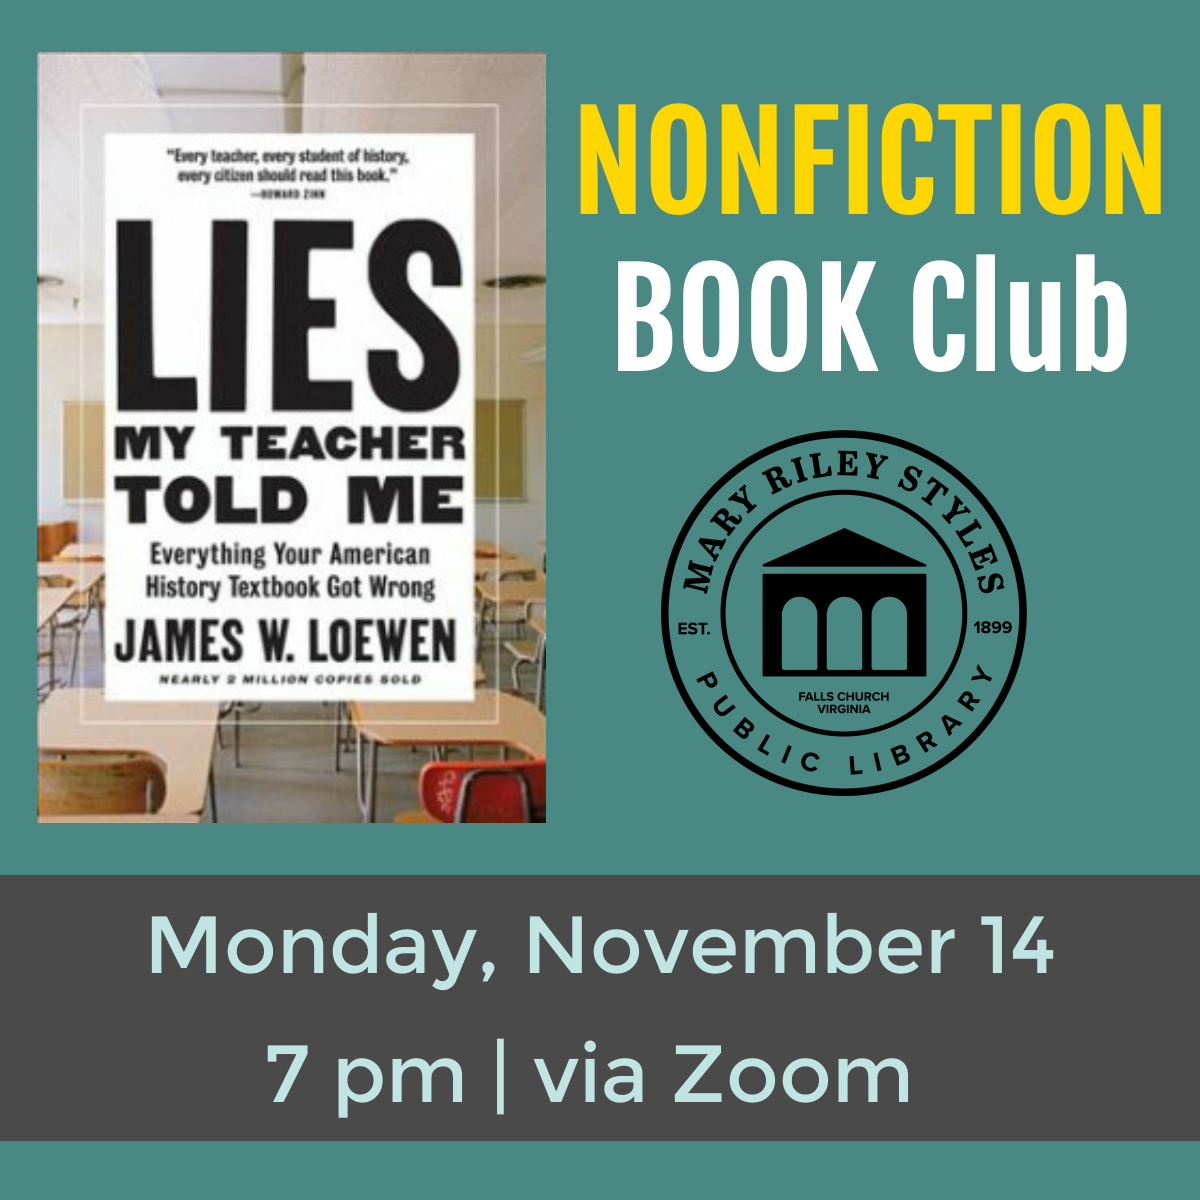 Nonfiction Book Club Monday November 14 at 7 pm via Zoom Lies My Teacher Told Me by James Loewen